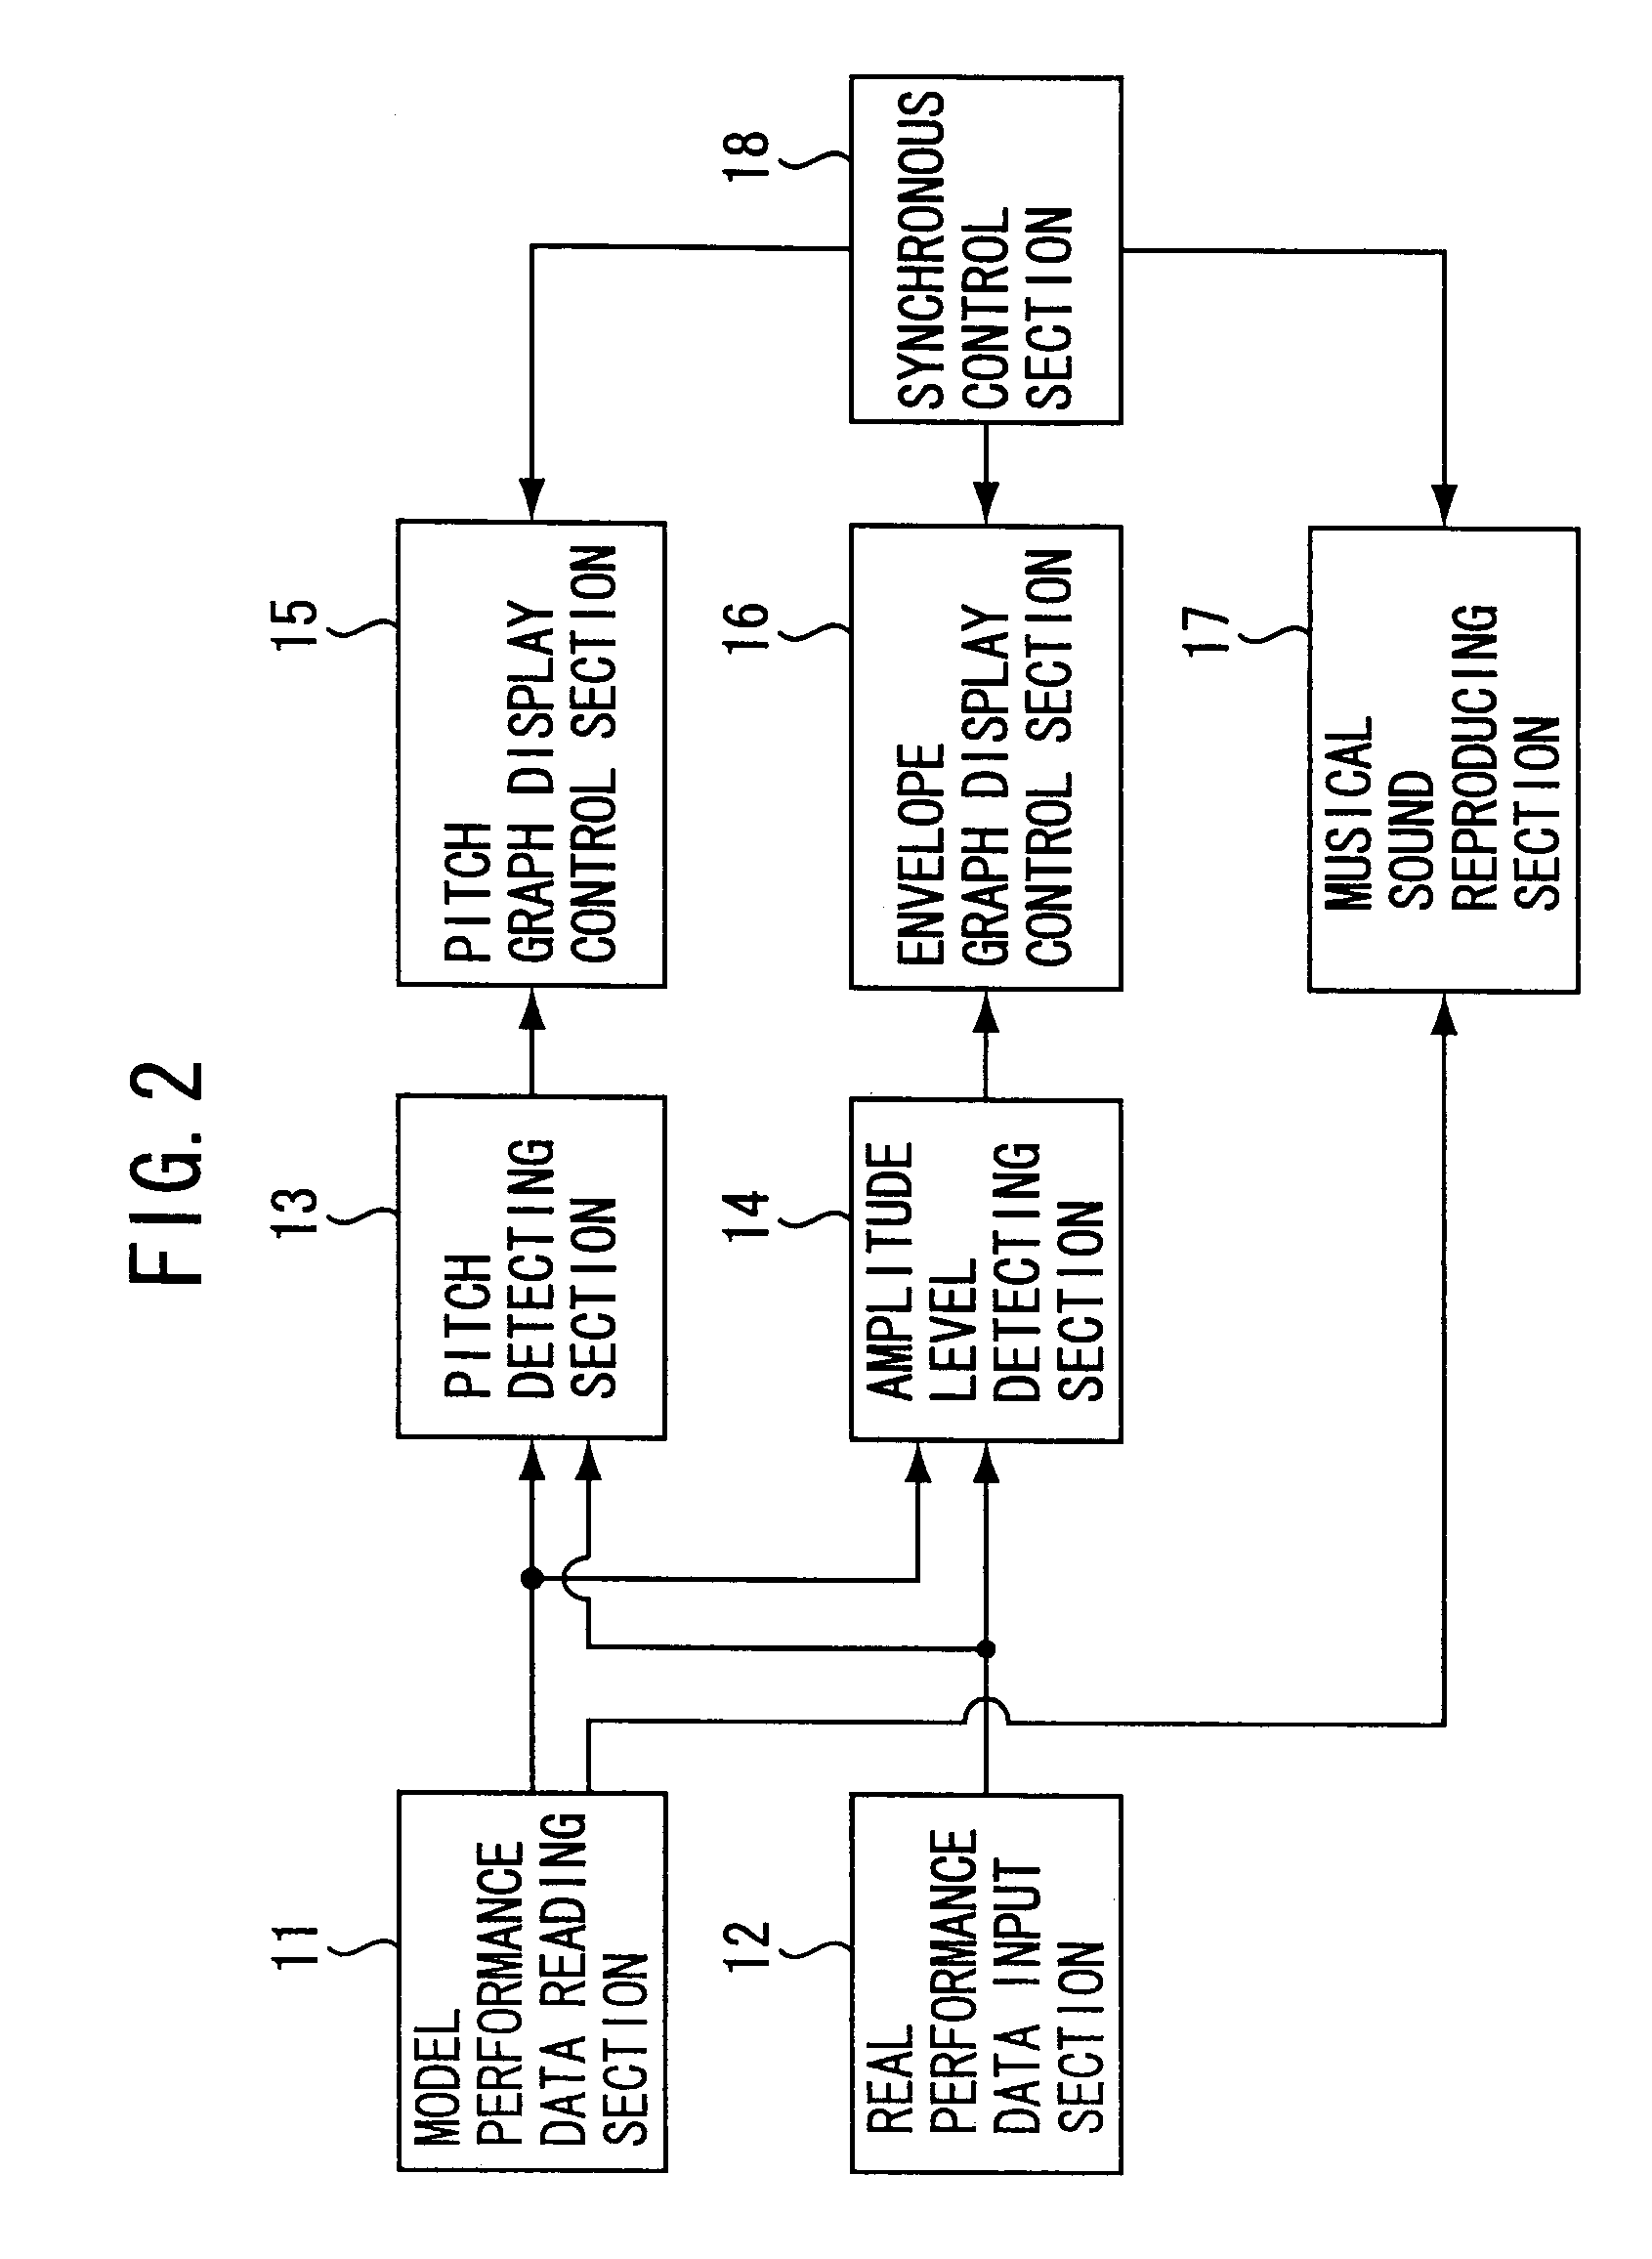 Instrument performance learning apparatus using pitch and amplitude graph display